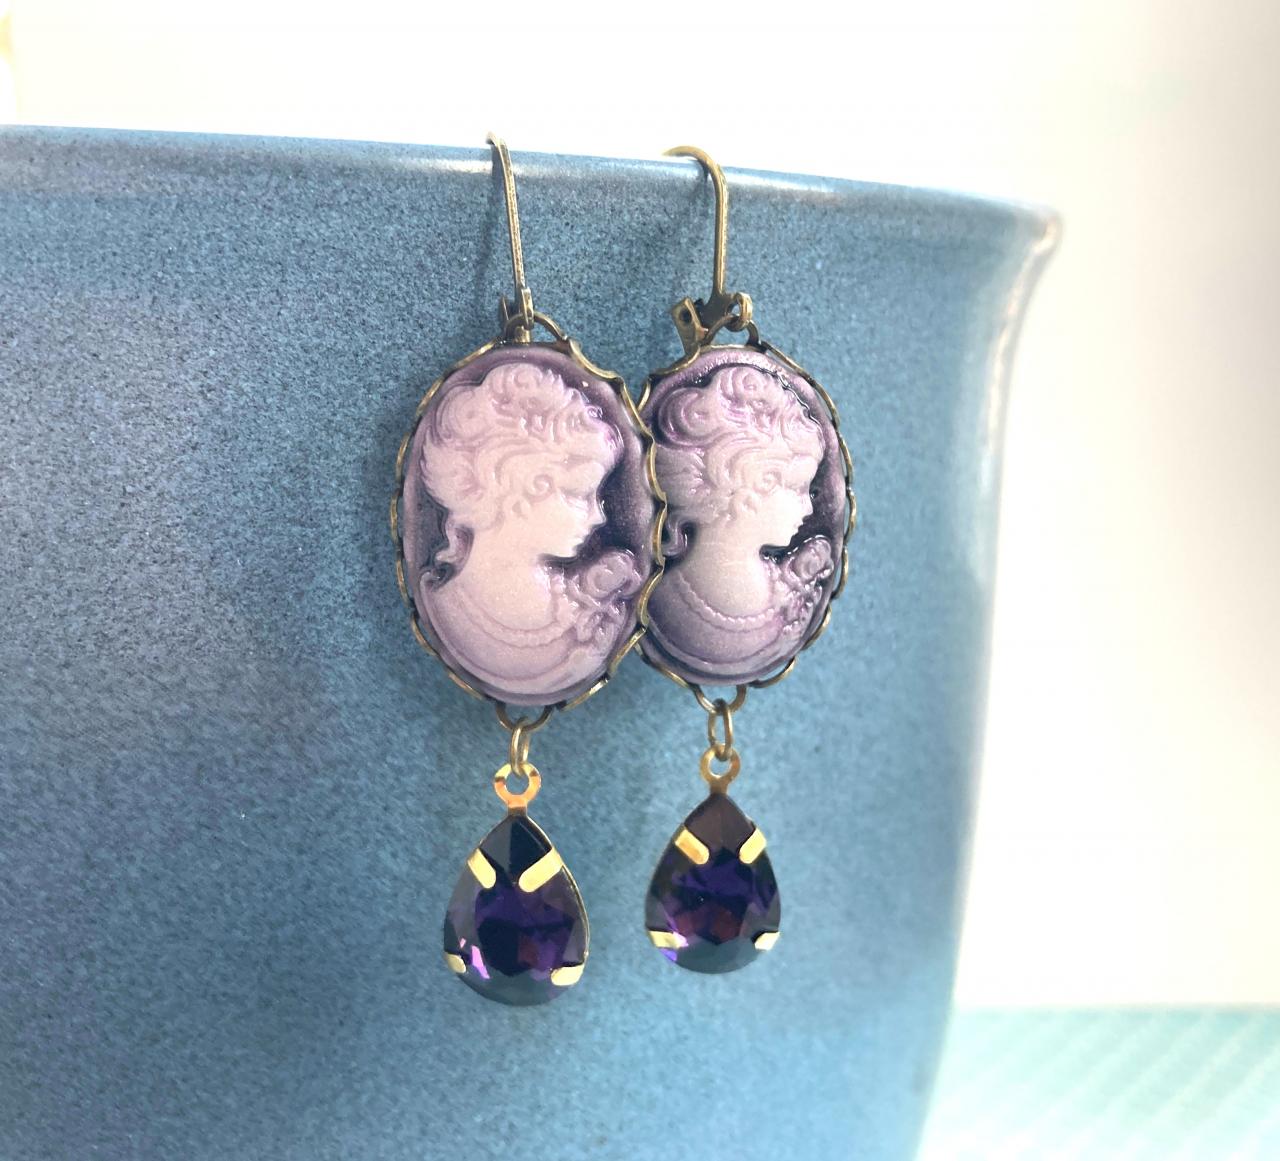 Lovely cameo earrings with glass pendants, Selma Dreams